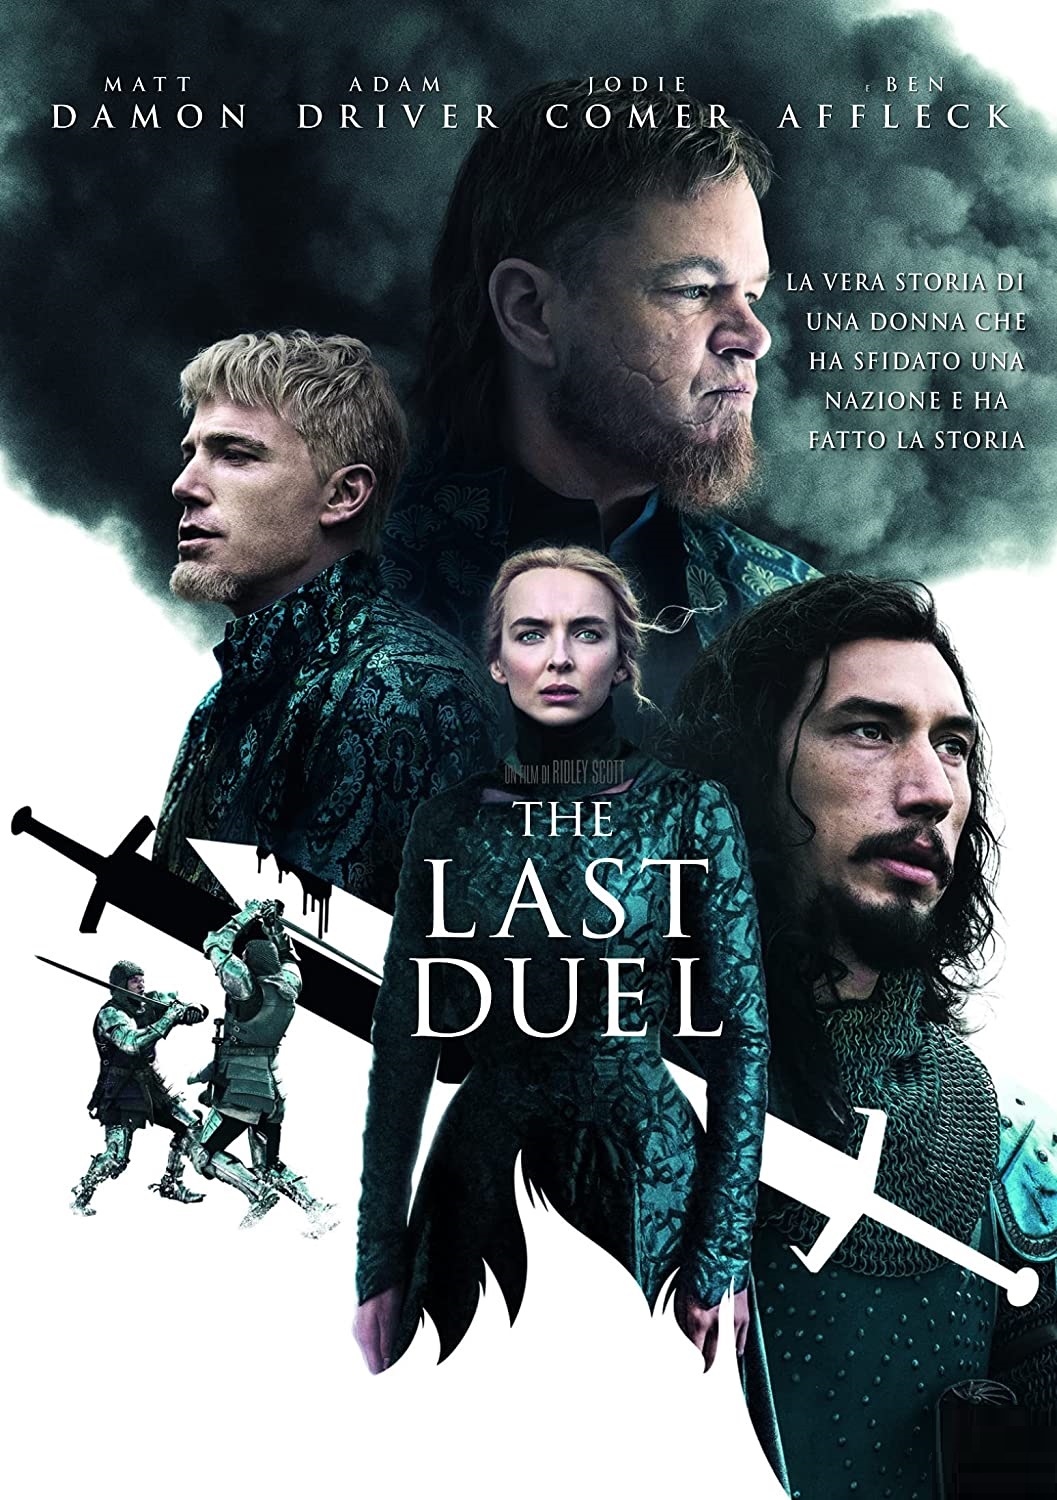 The Last Duel [HD] (2021)